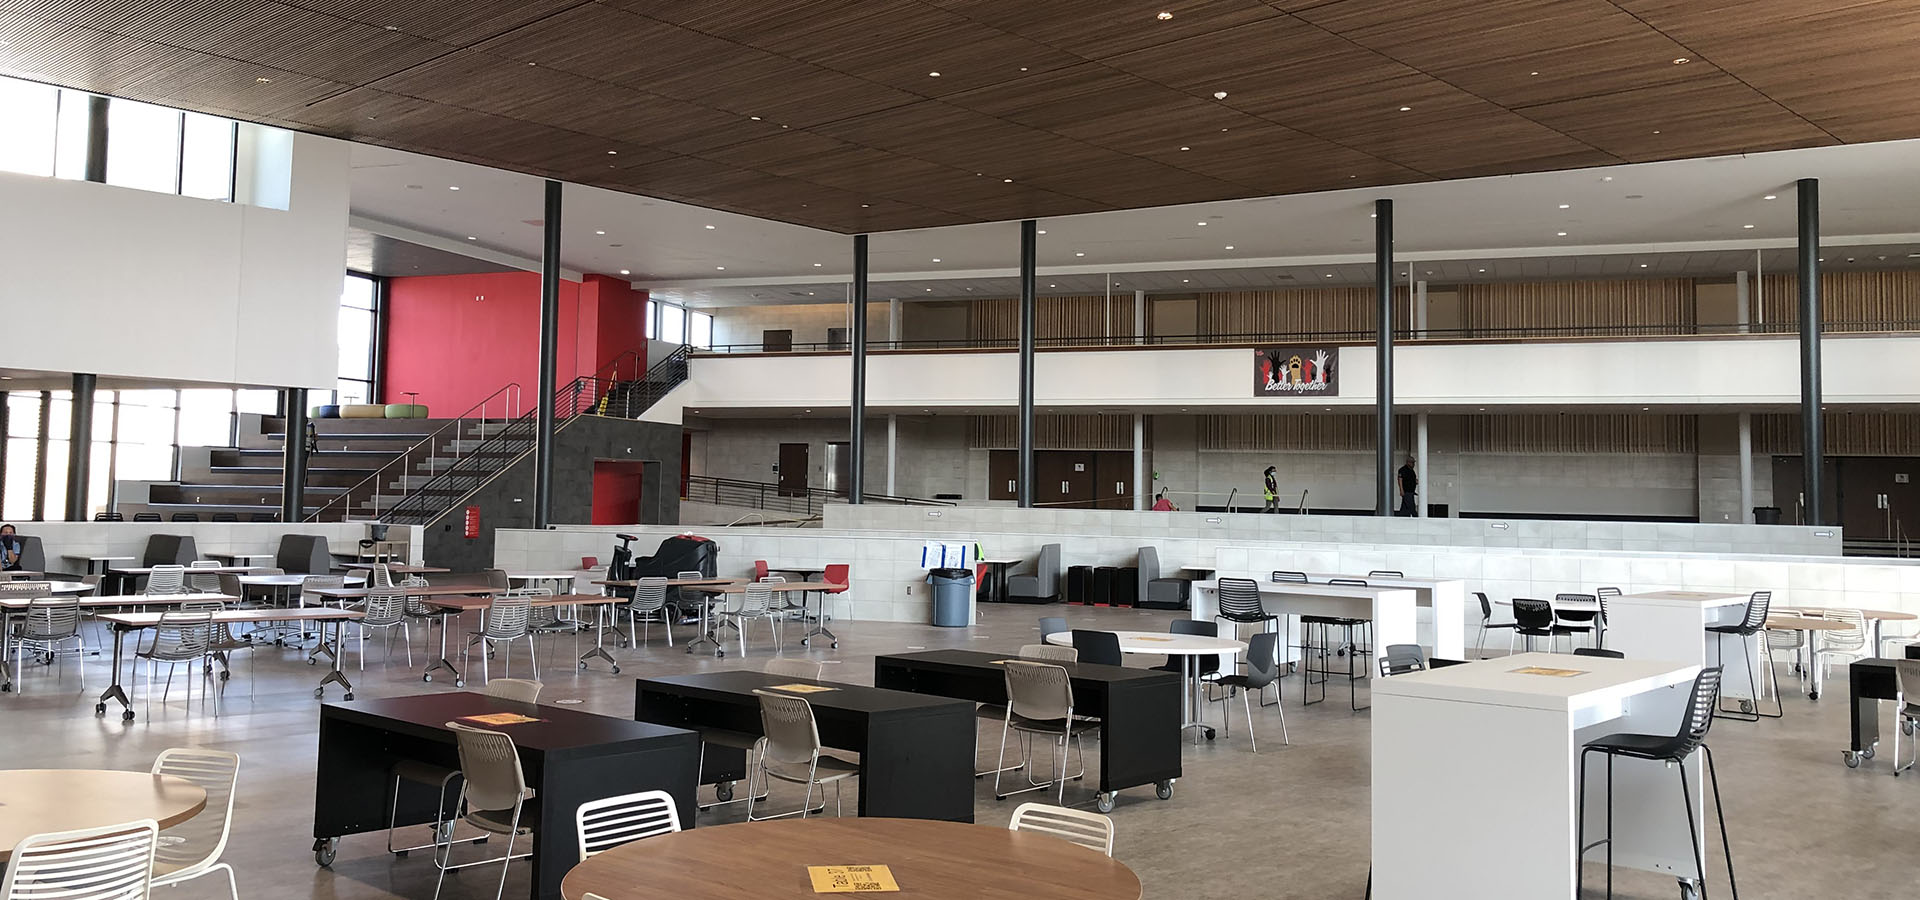 Lake Highlands High School Addition and MAC Completed